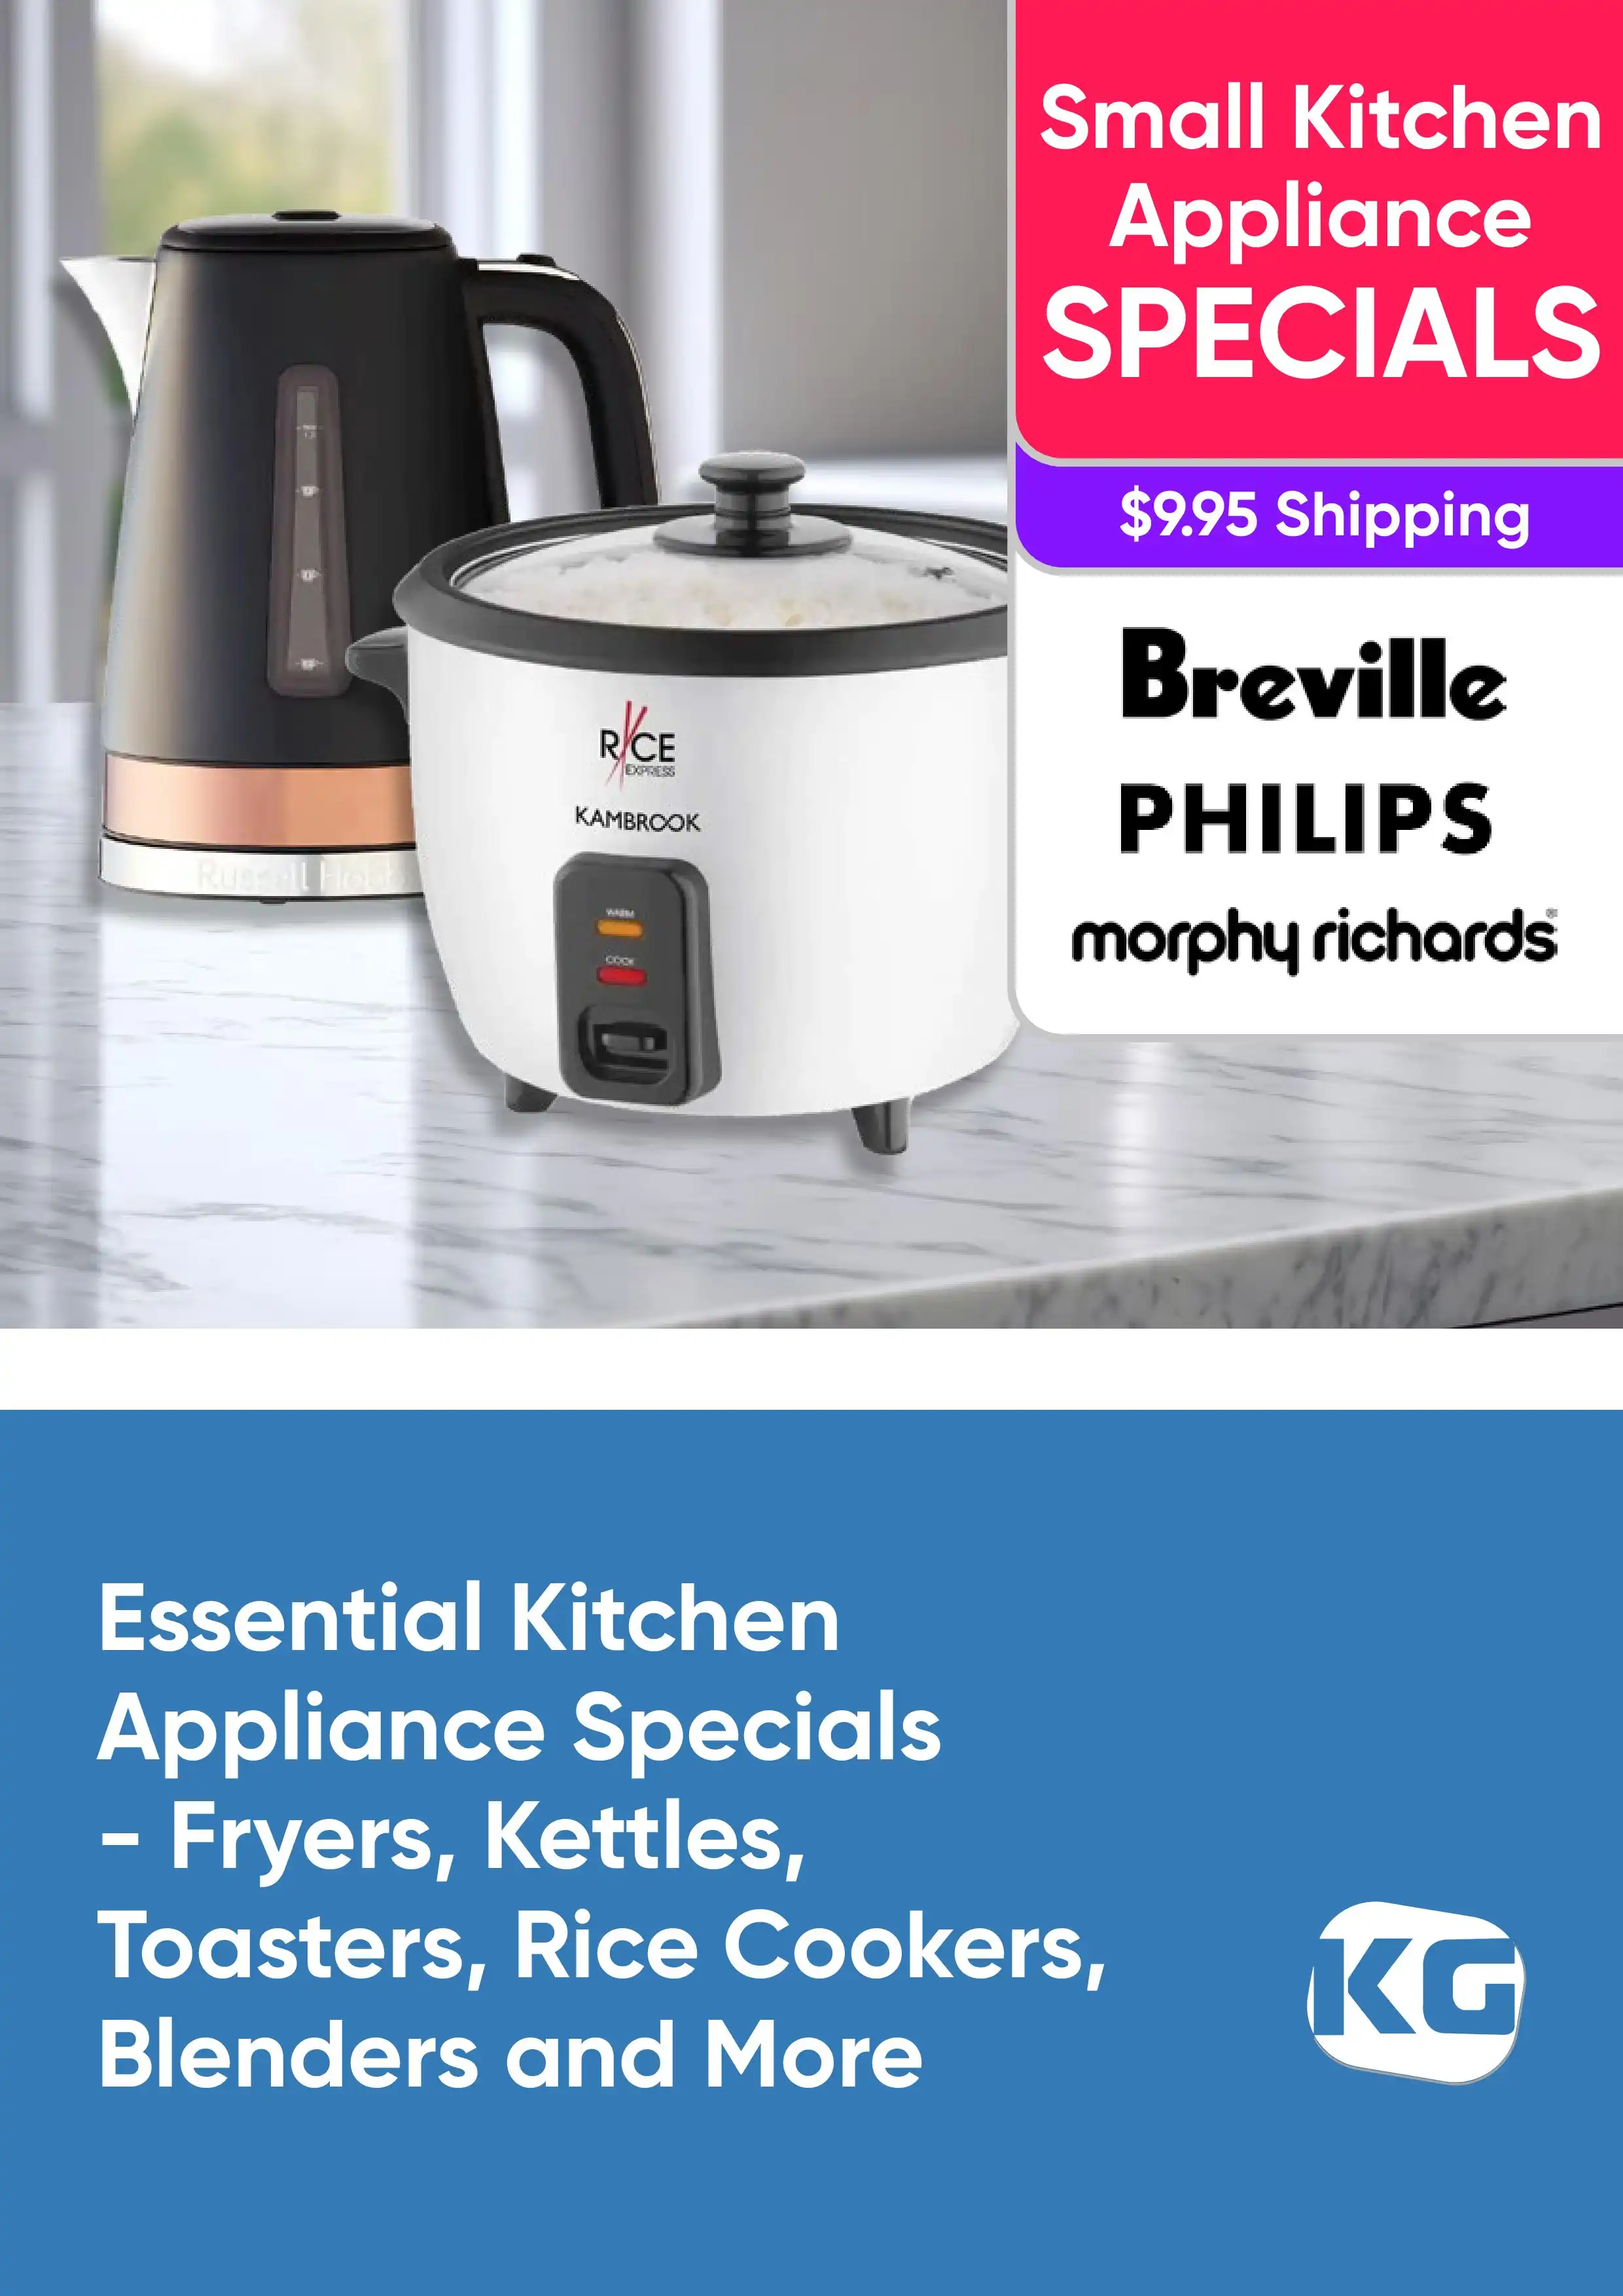 Essential Kitchen Appliance Specials - Fryers, Kettles, Toasters, Rice Cookers, Blenders and More